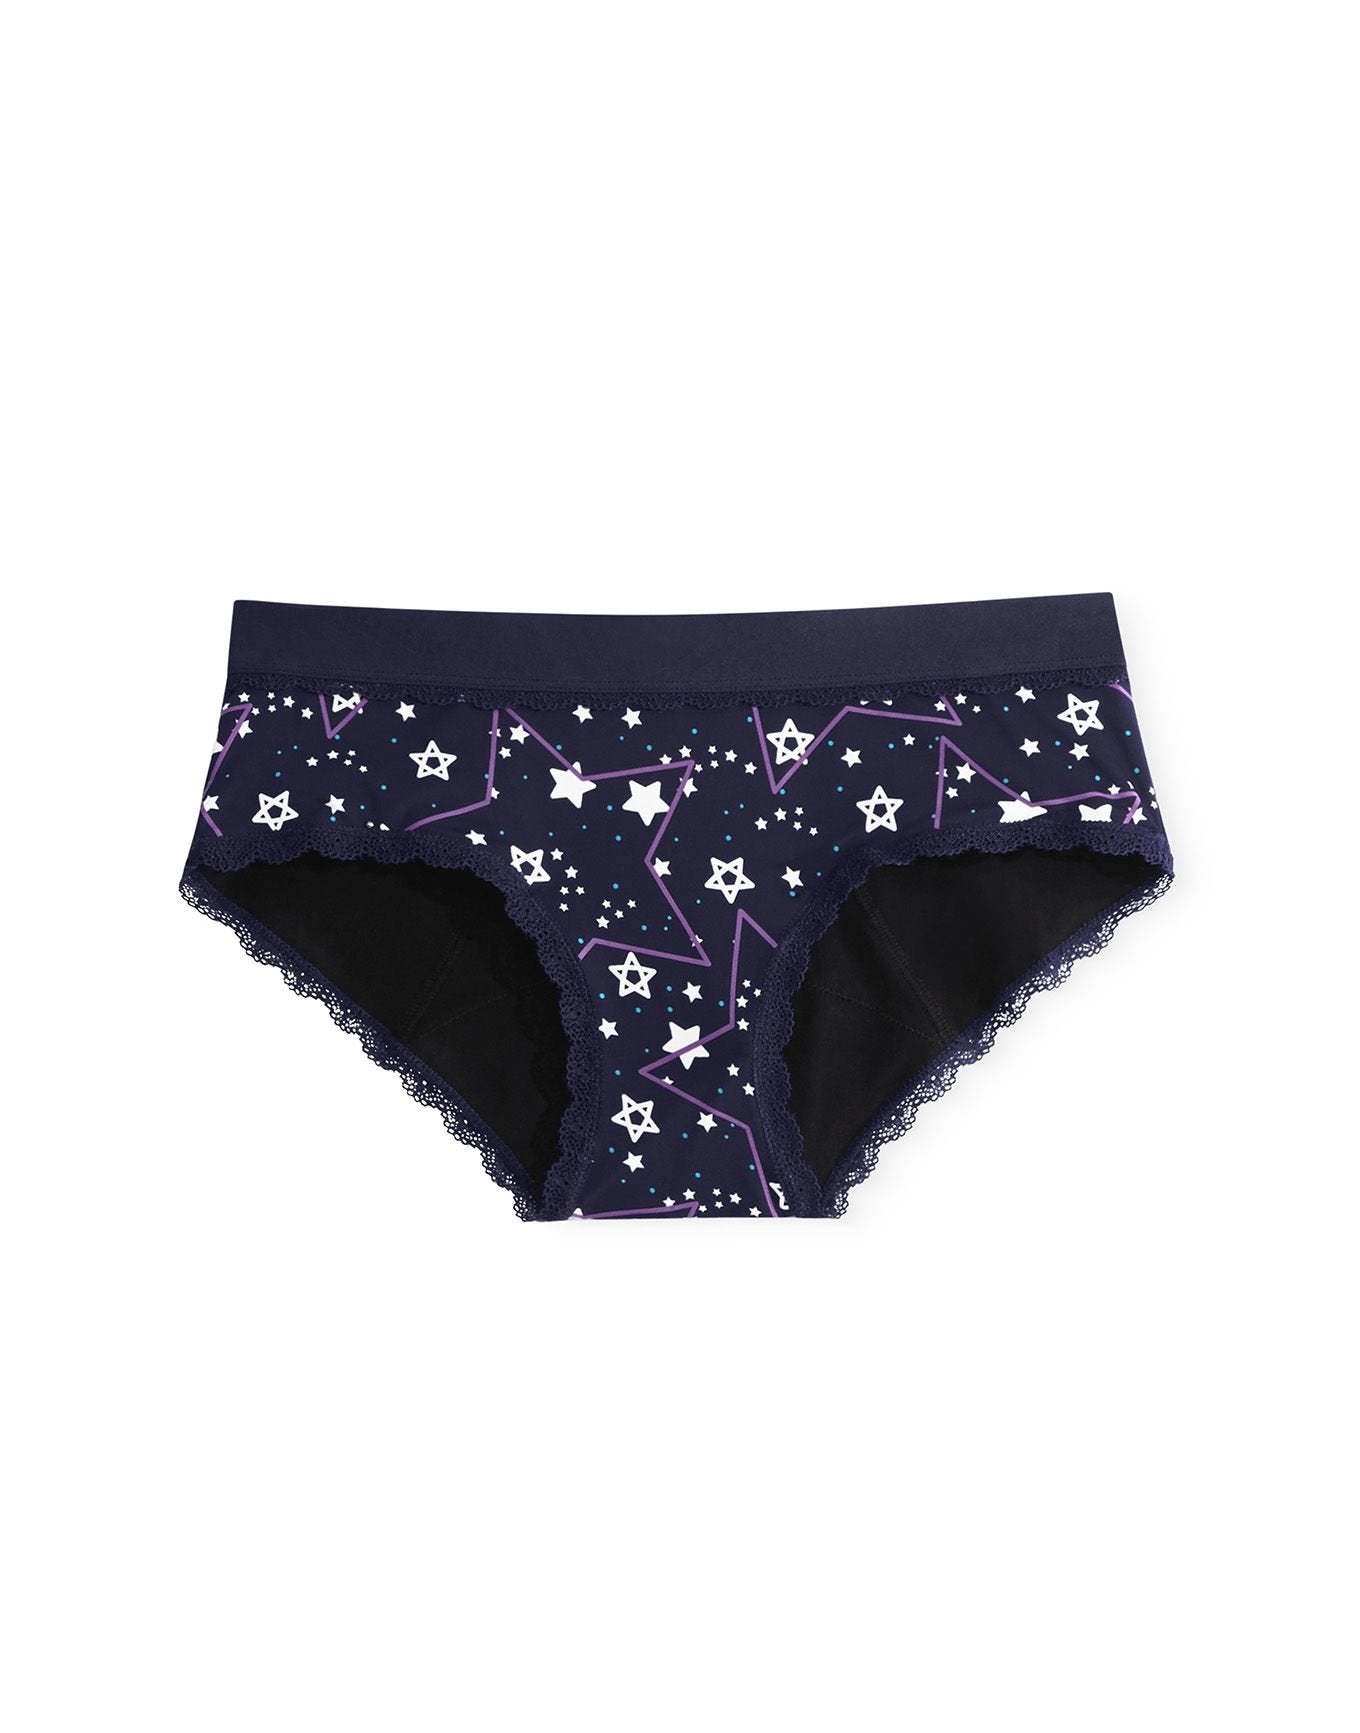 Our special edition summer splash period panty is here! This is